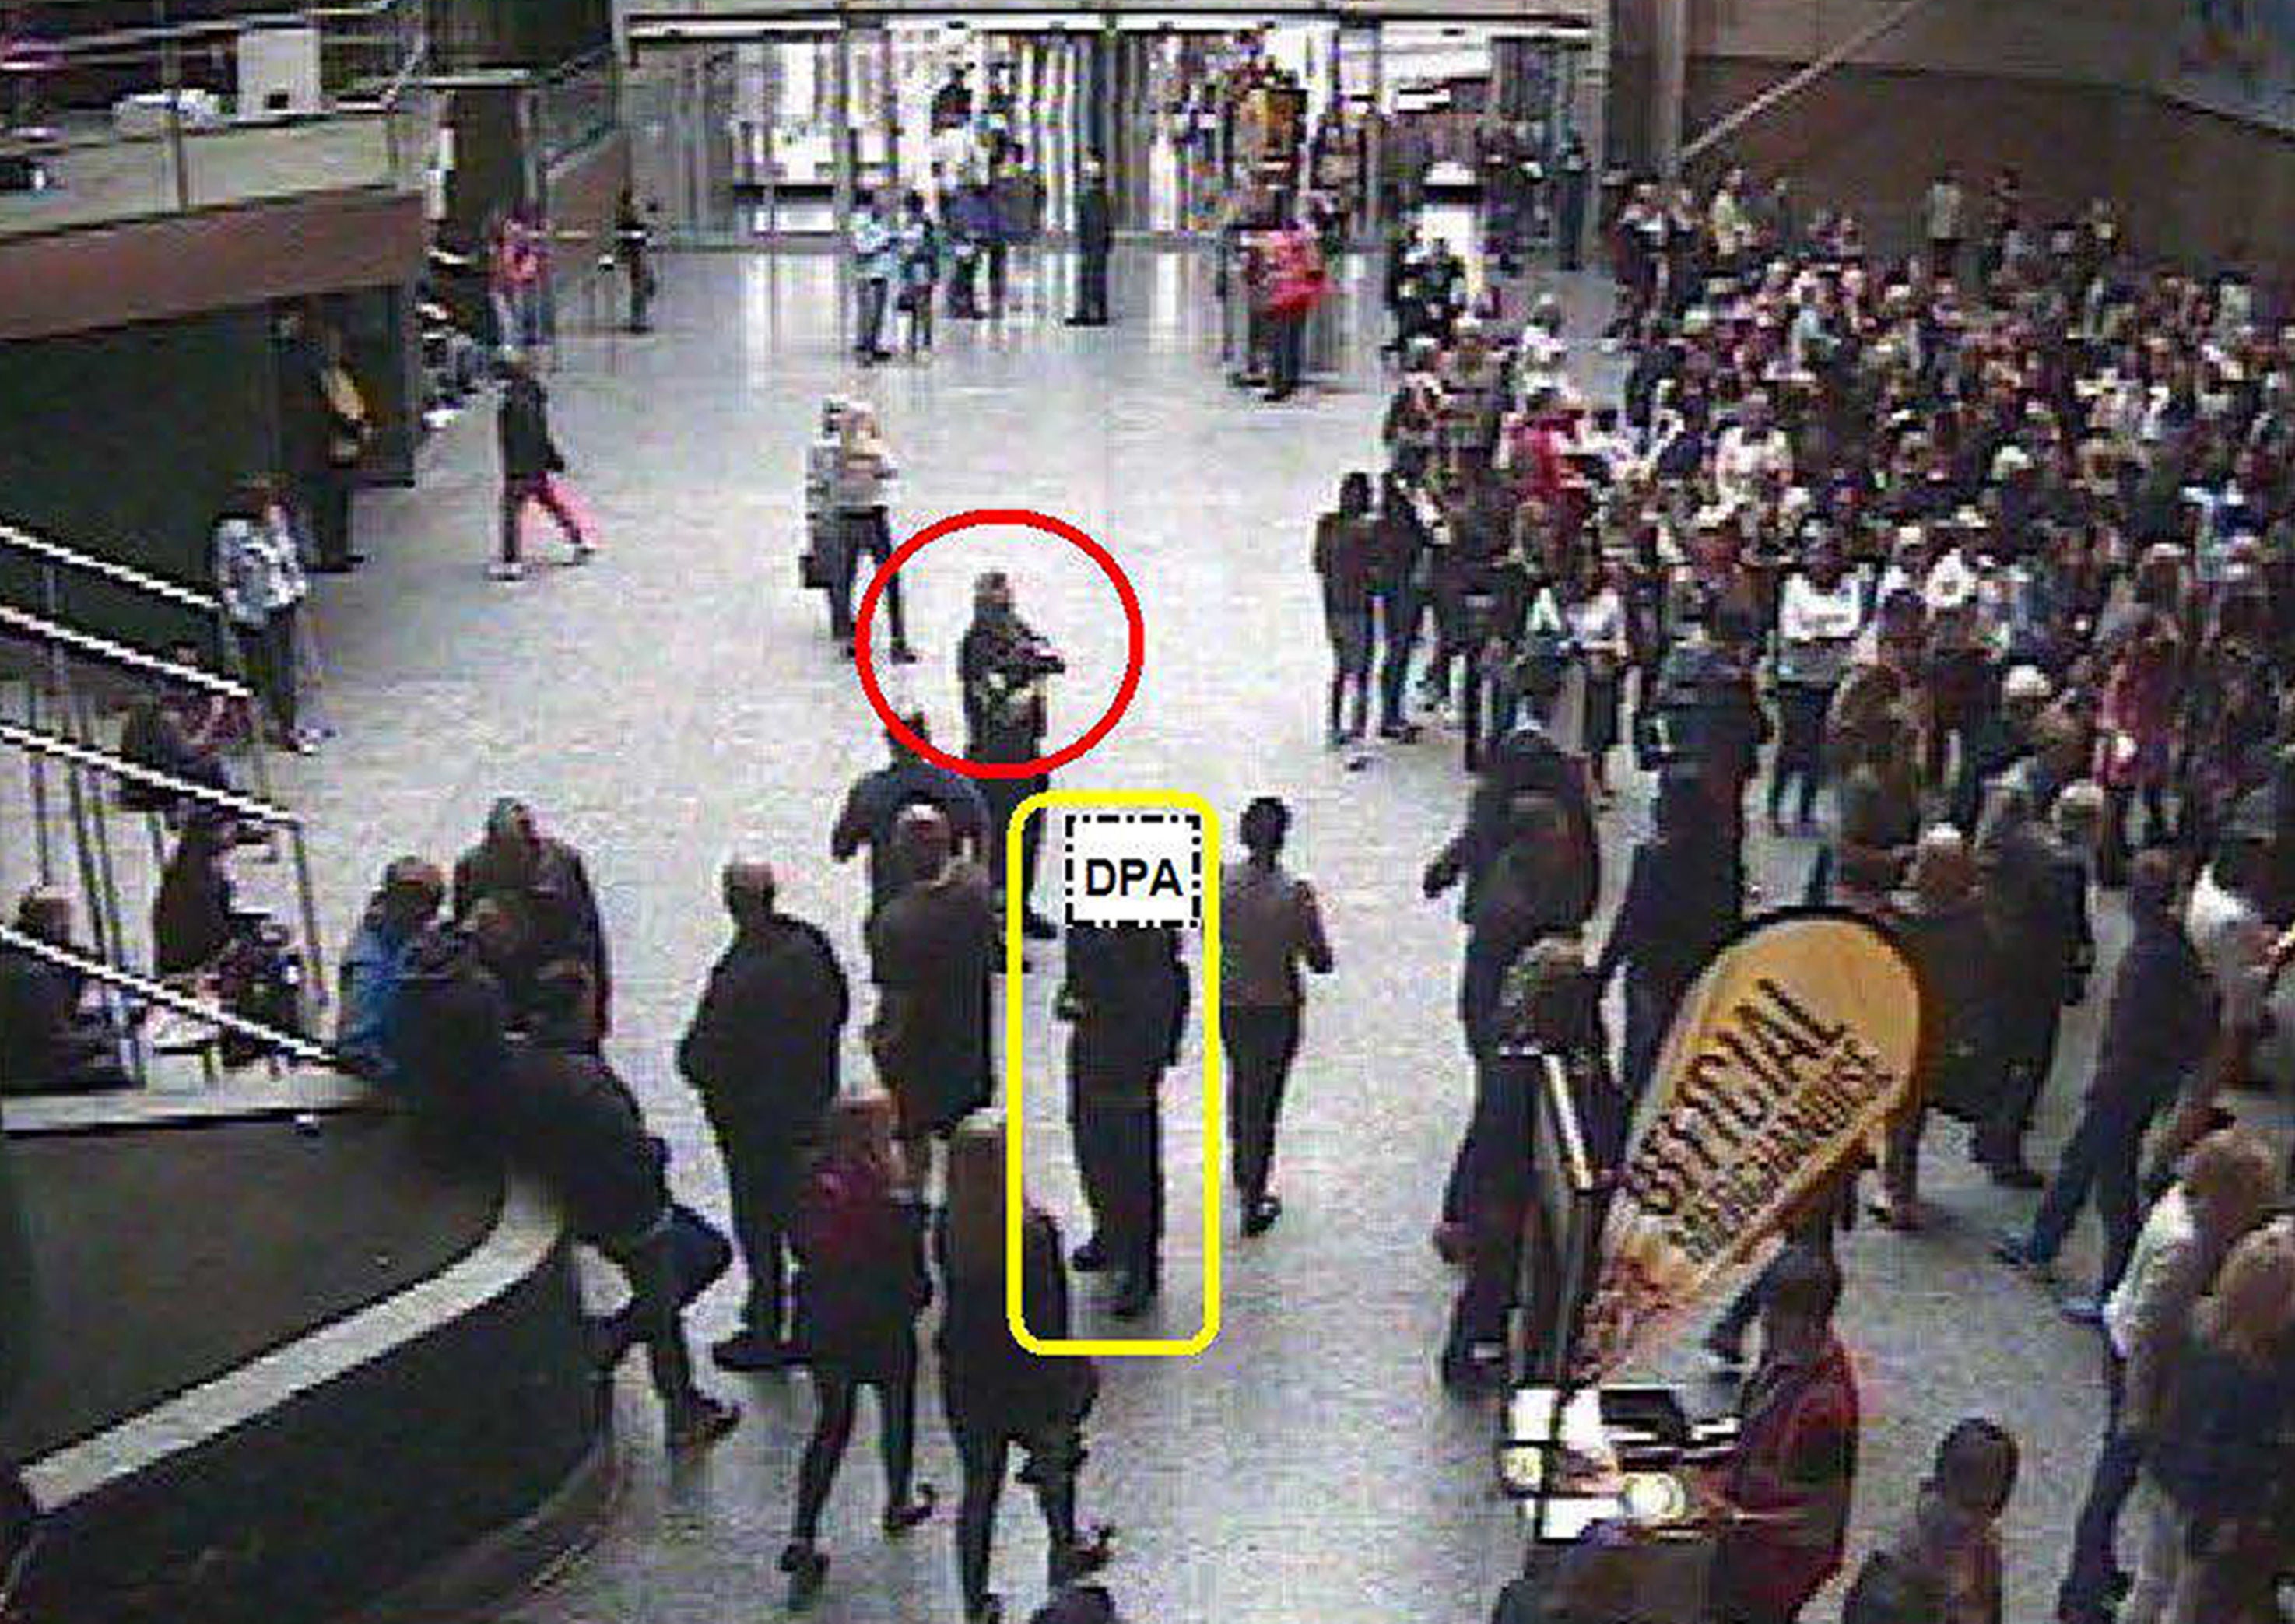 CCTV evidence presented at the inquiry into the Manchester Arena bombing